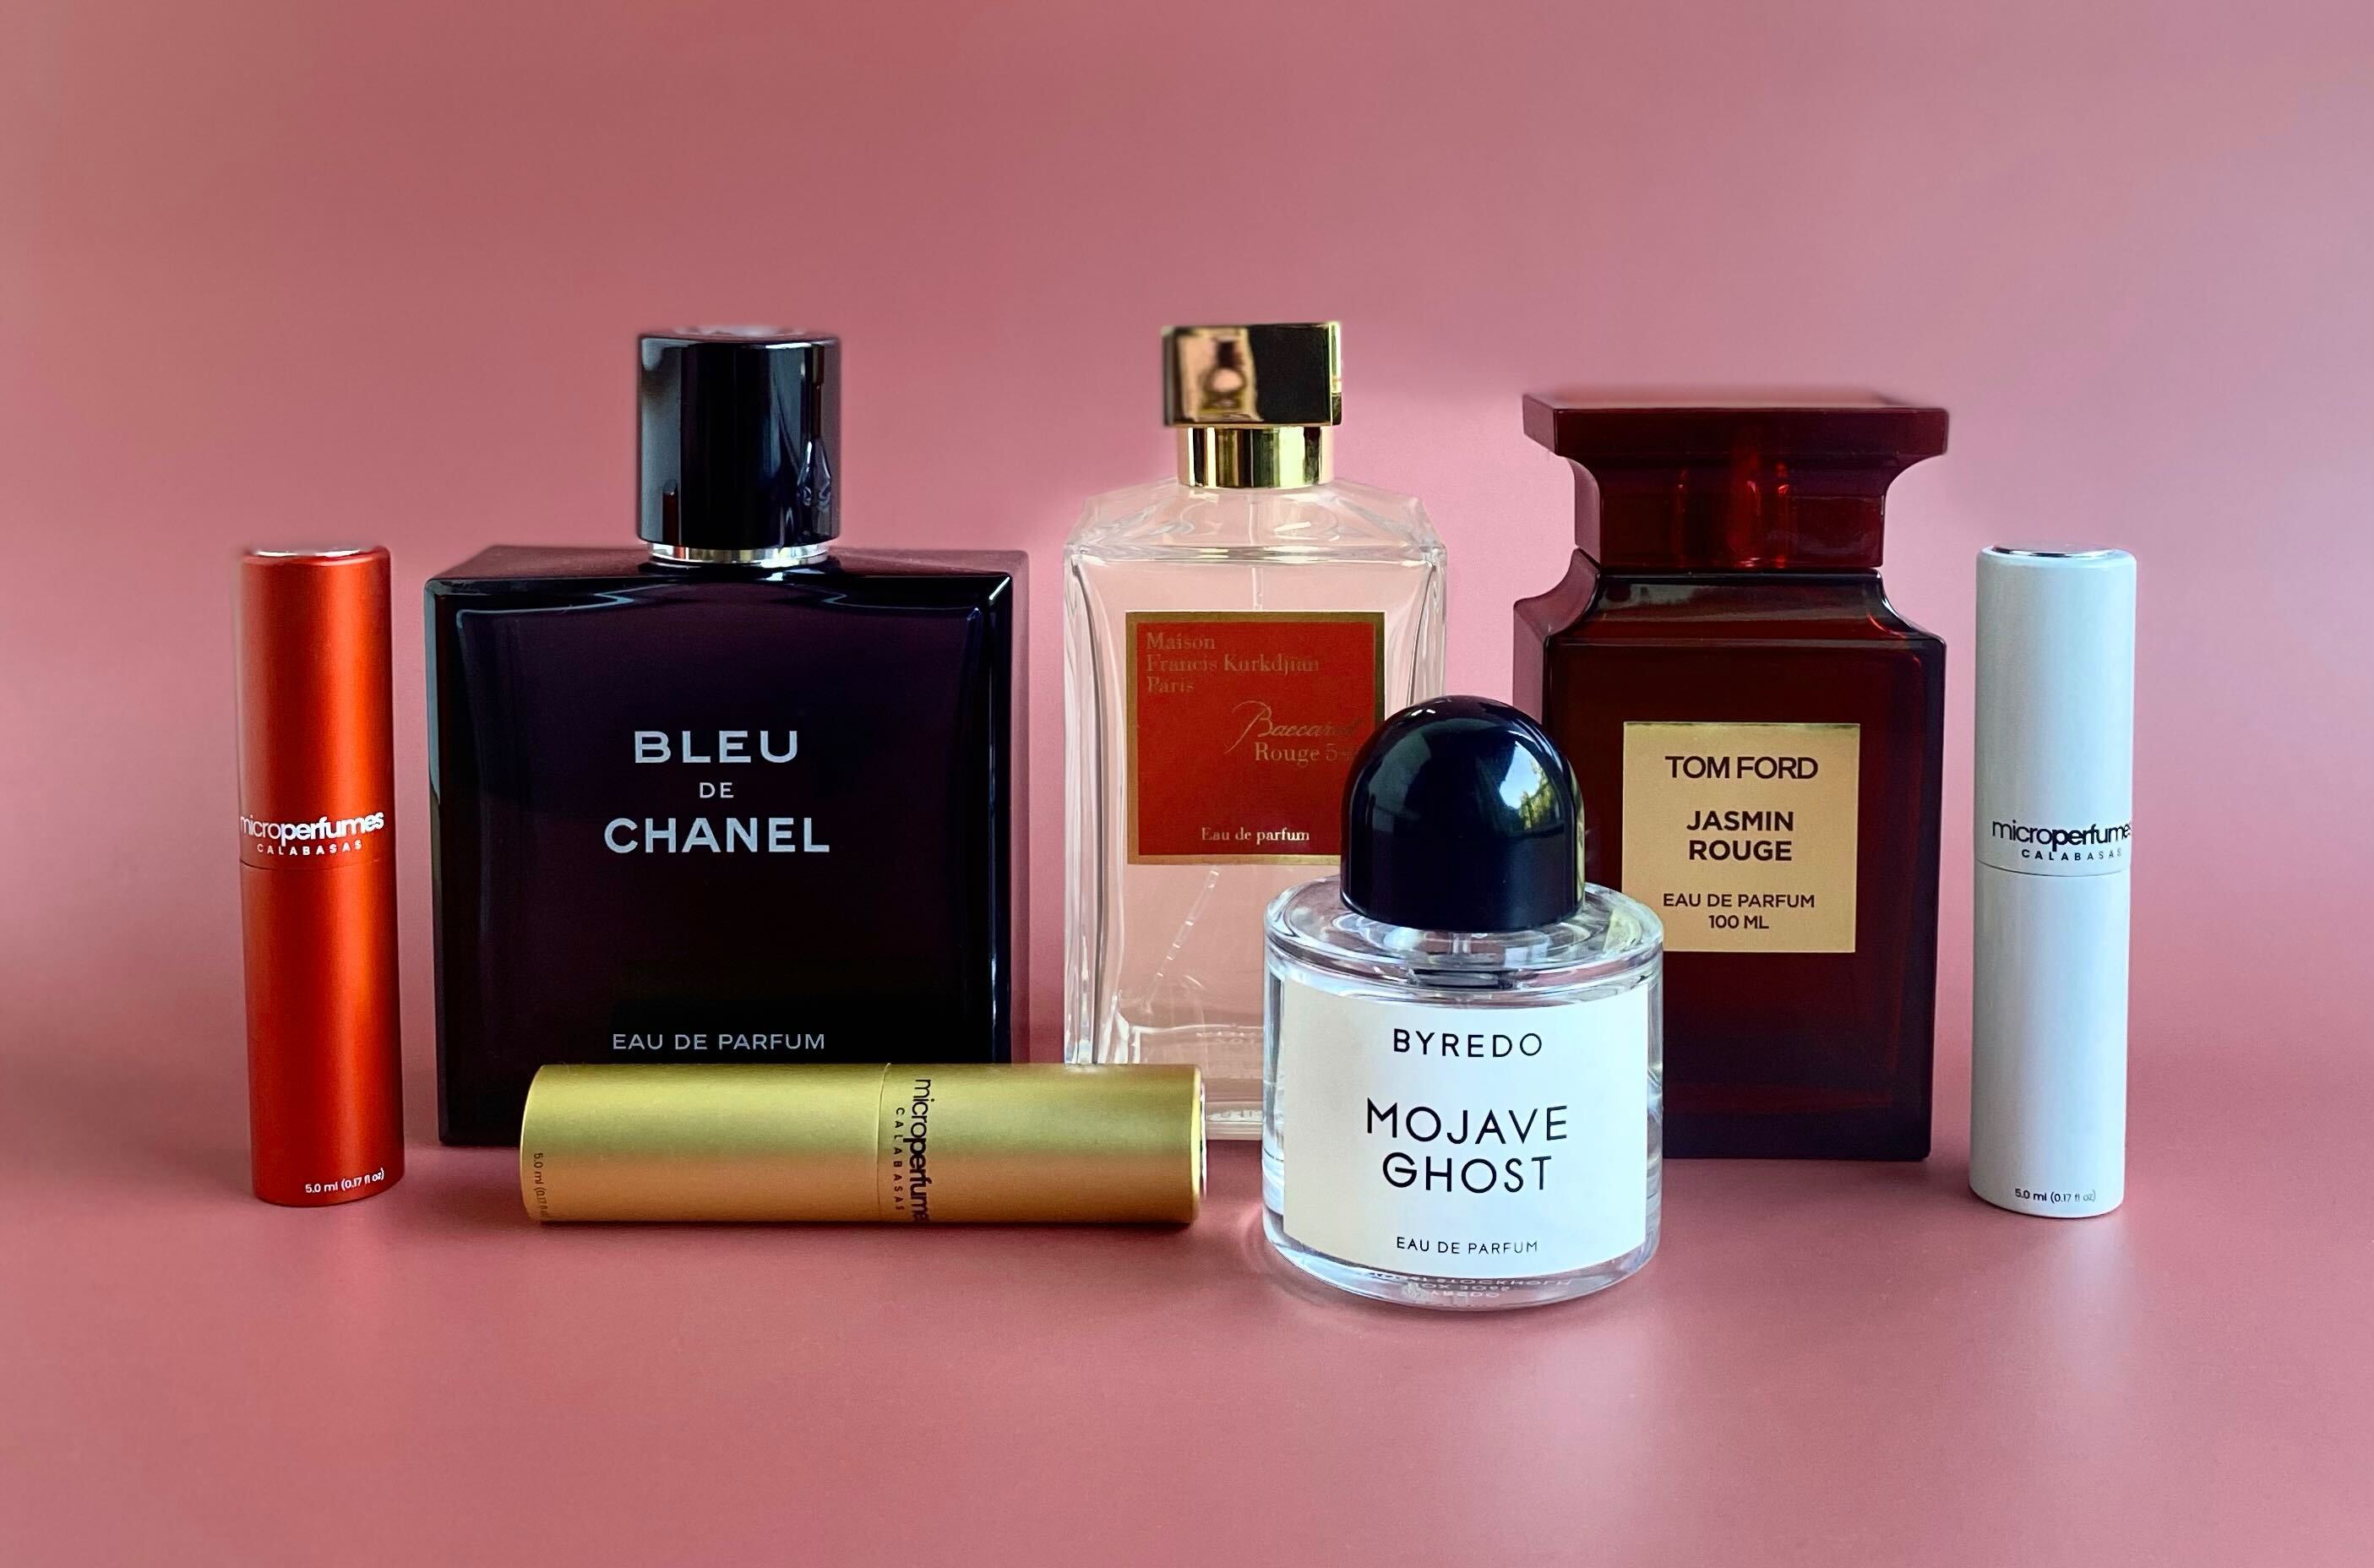 Perfume Samples, Colognes, and Fragrances